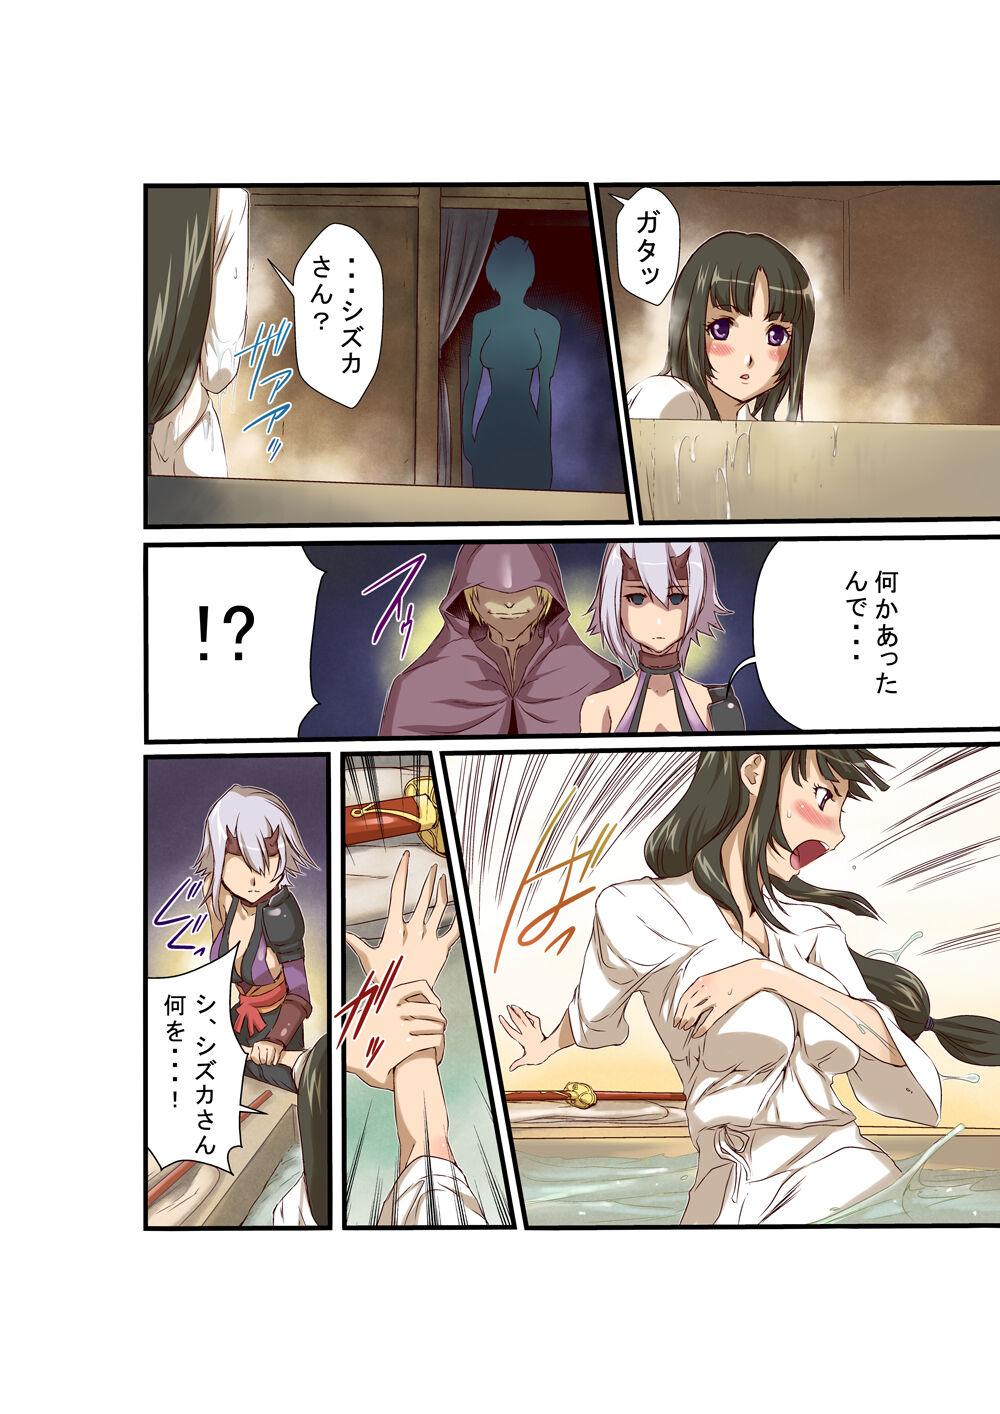 Nice Ass Queen's *lade Mind-control Manga - Queens blade Gym - Page 6